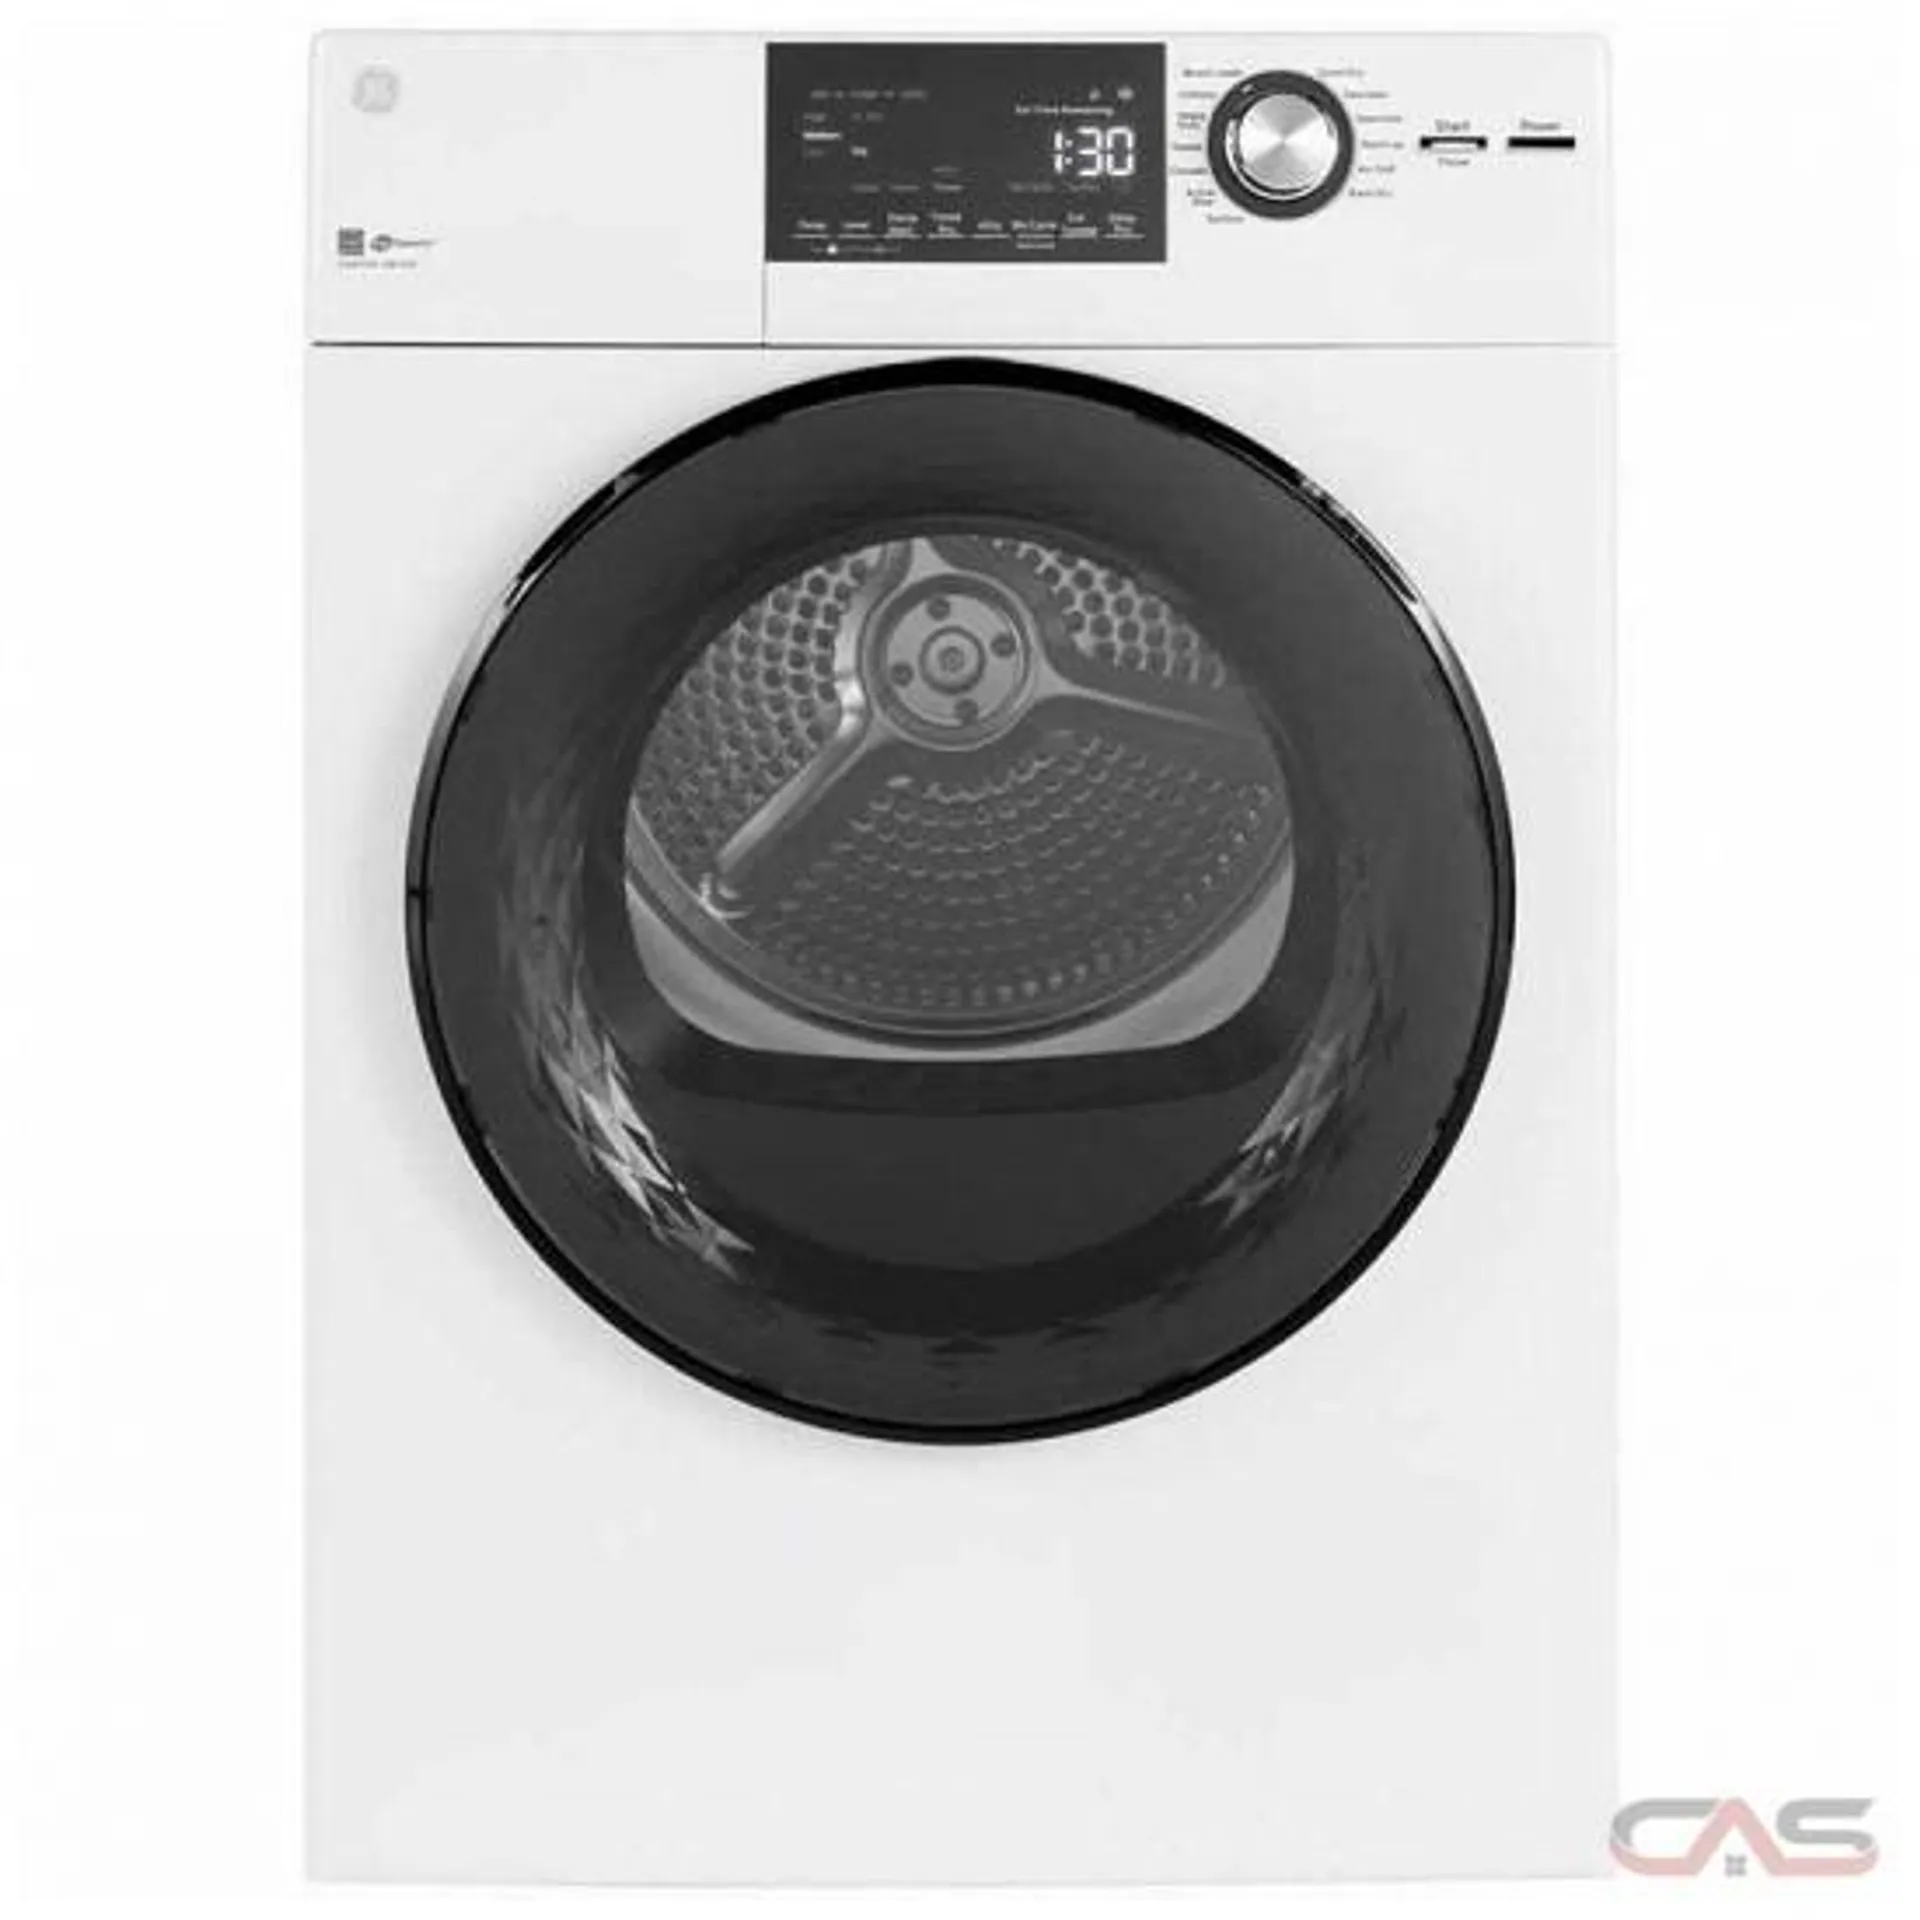 GE GFT14JSIMWW Dryer, 24 inch Width, Electric, 4.1 cu. ft. Capacity, 3 Temperature Settings, Stackable, Steel Drum, White colour Ventless (Condensing)